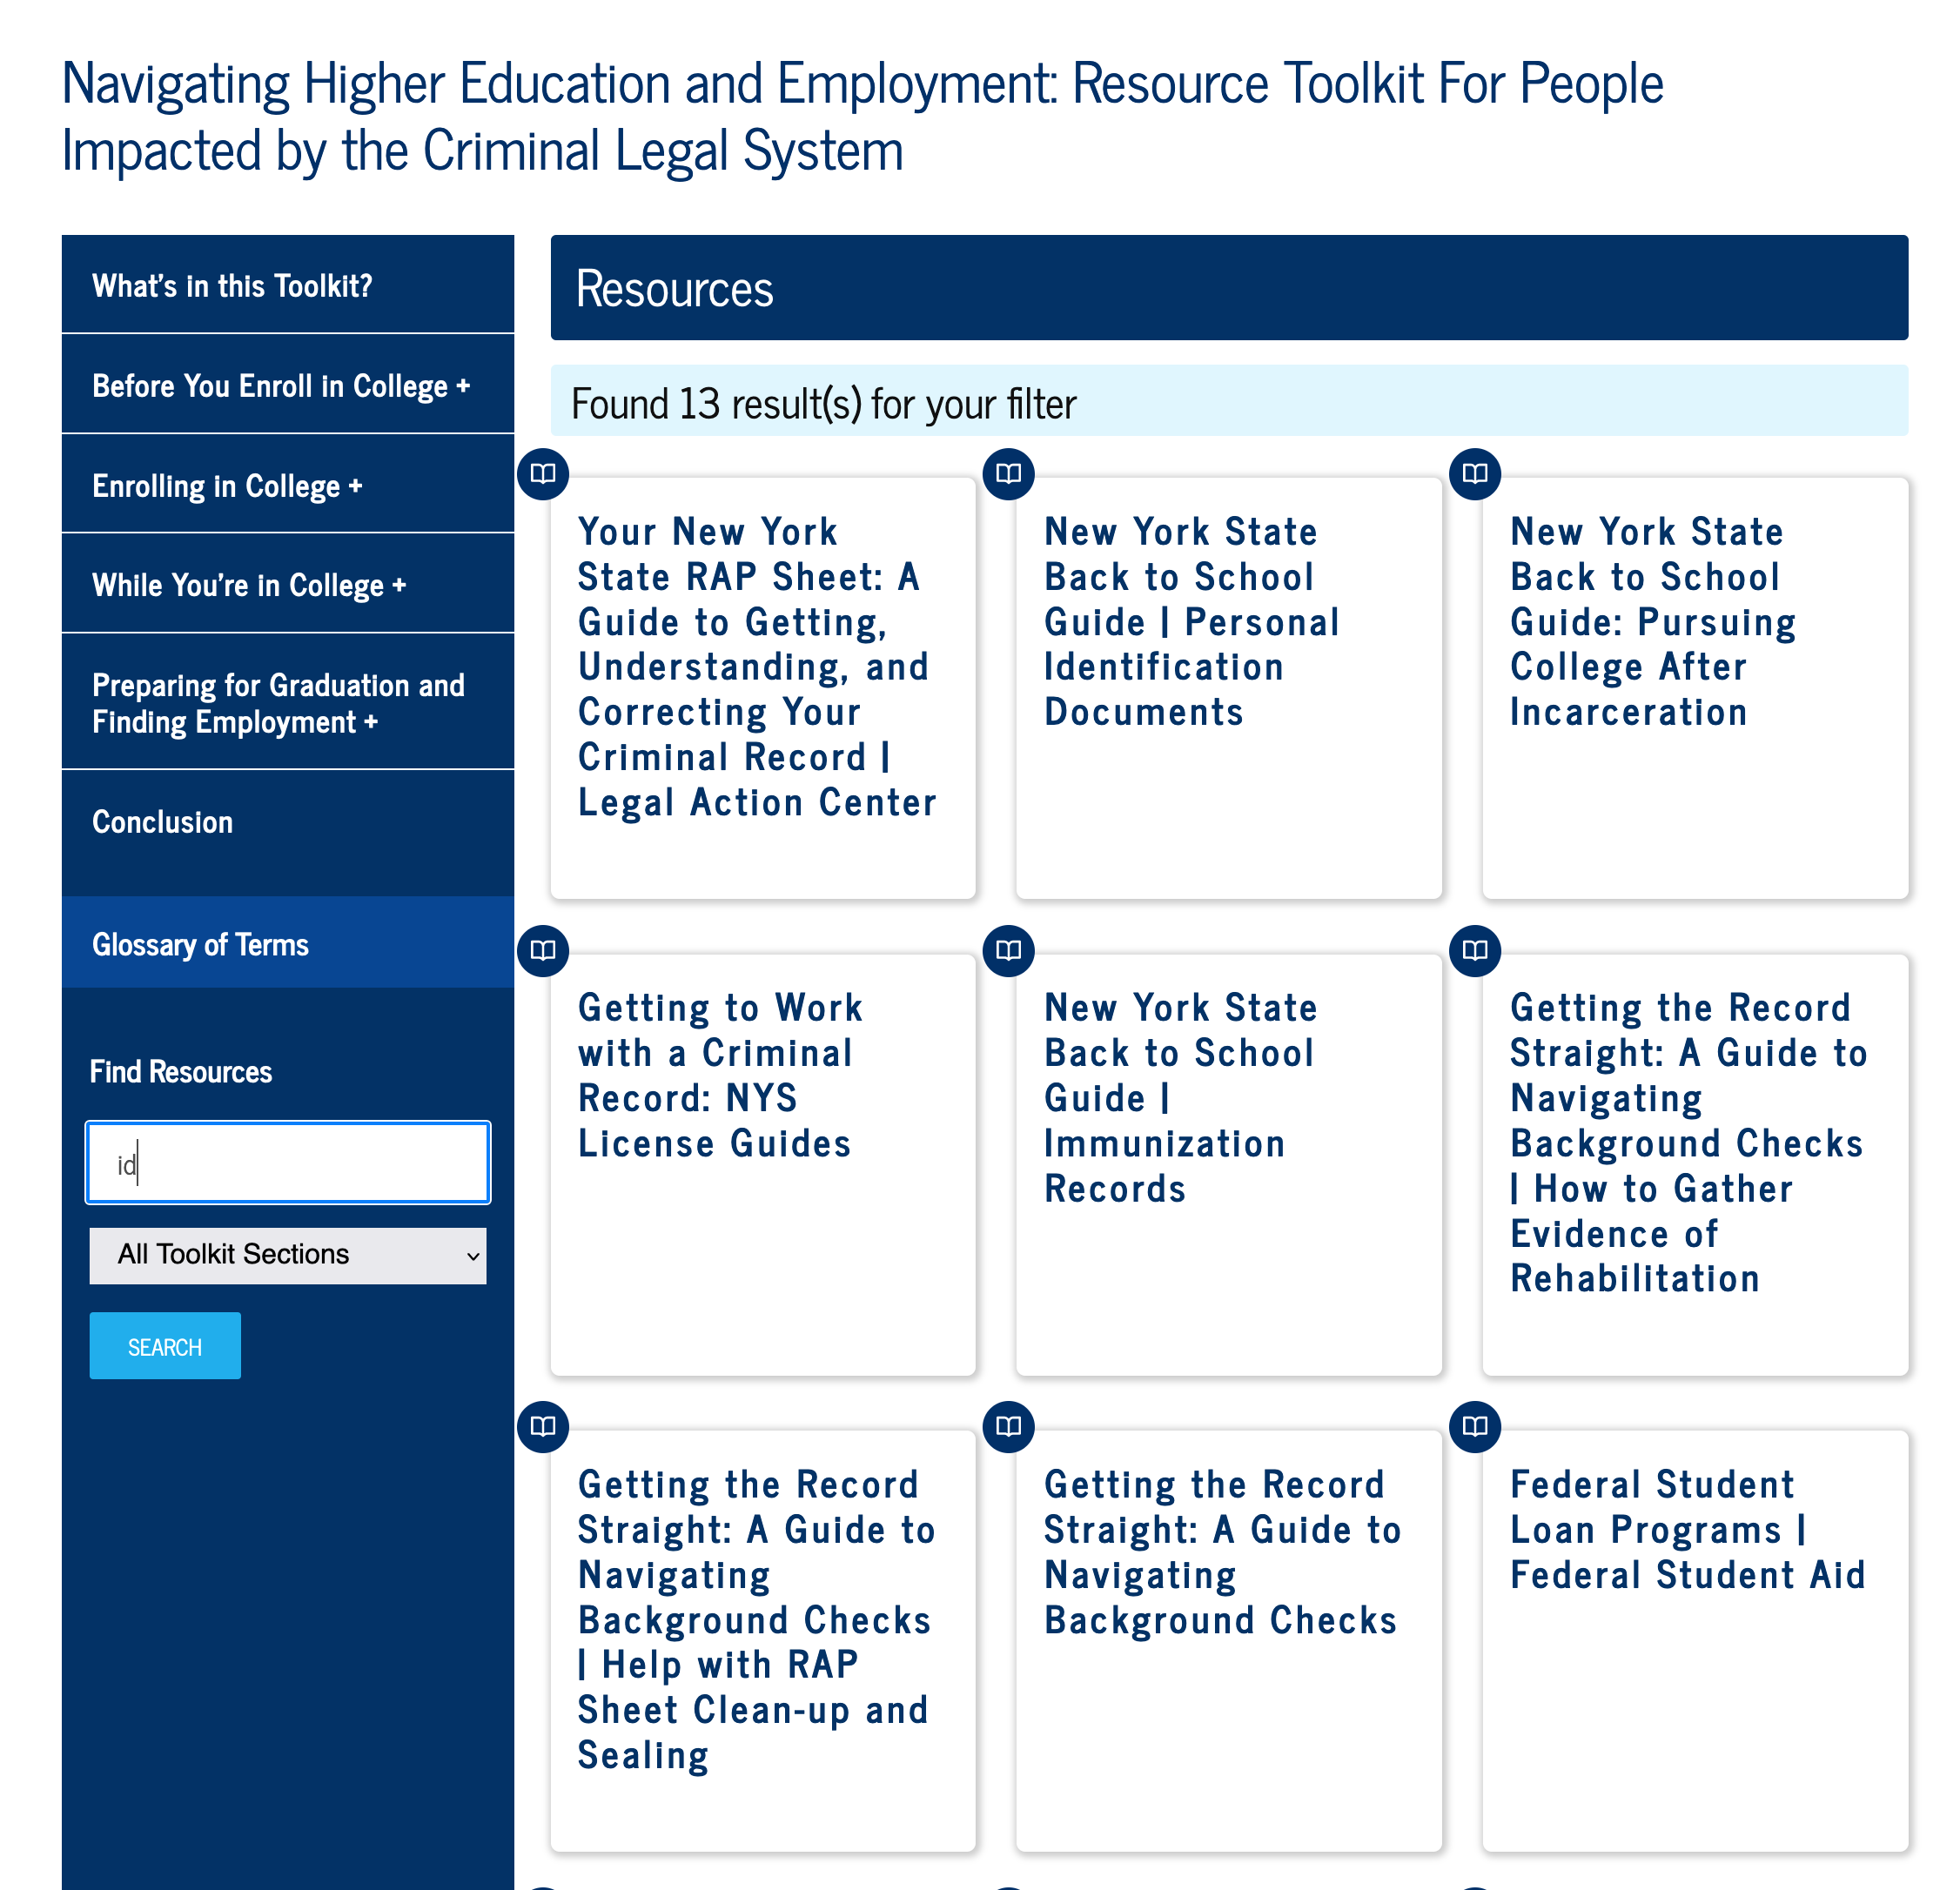 Interactive Toolkit for the Institute of Justice and Opportunity at CUNY John Jay: Justice and Opportunity Institute Toolkit: Resources